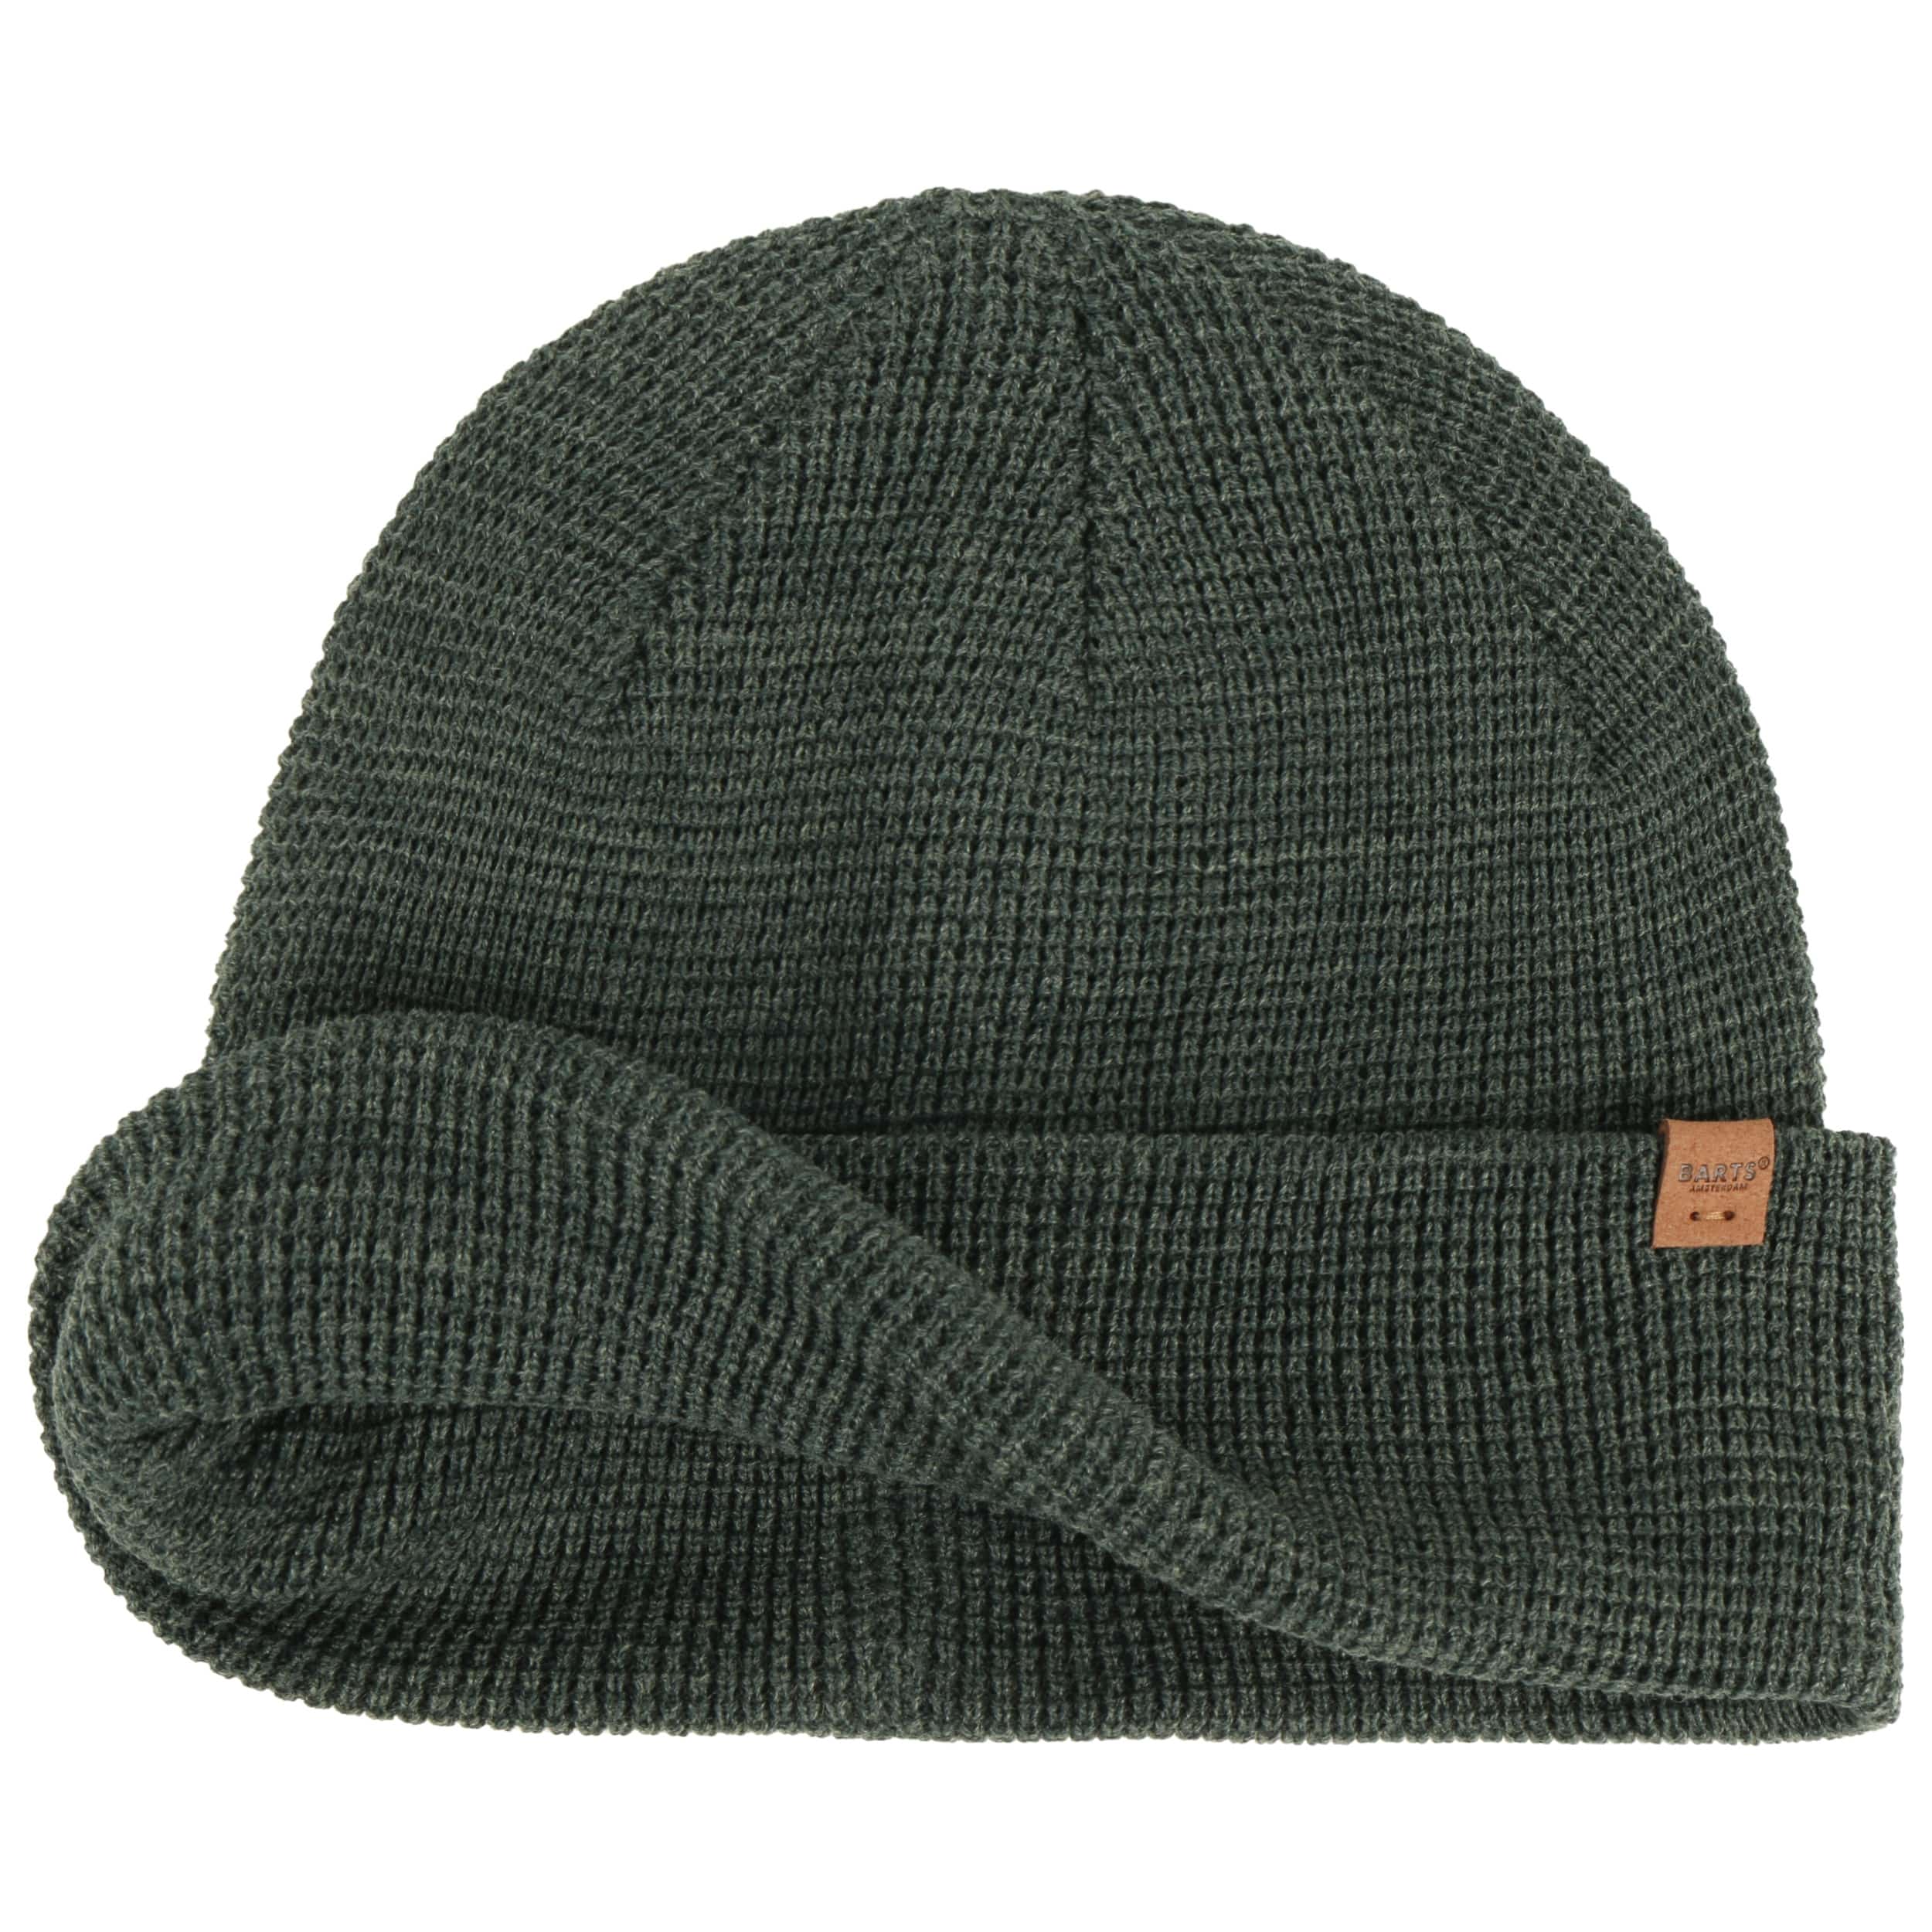 Coler Barts 22,95 Beanie - by £ Hat